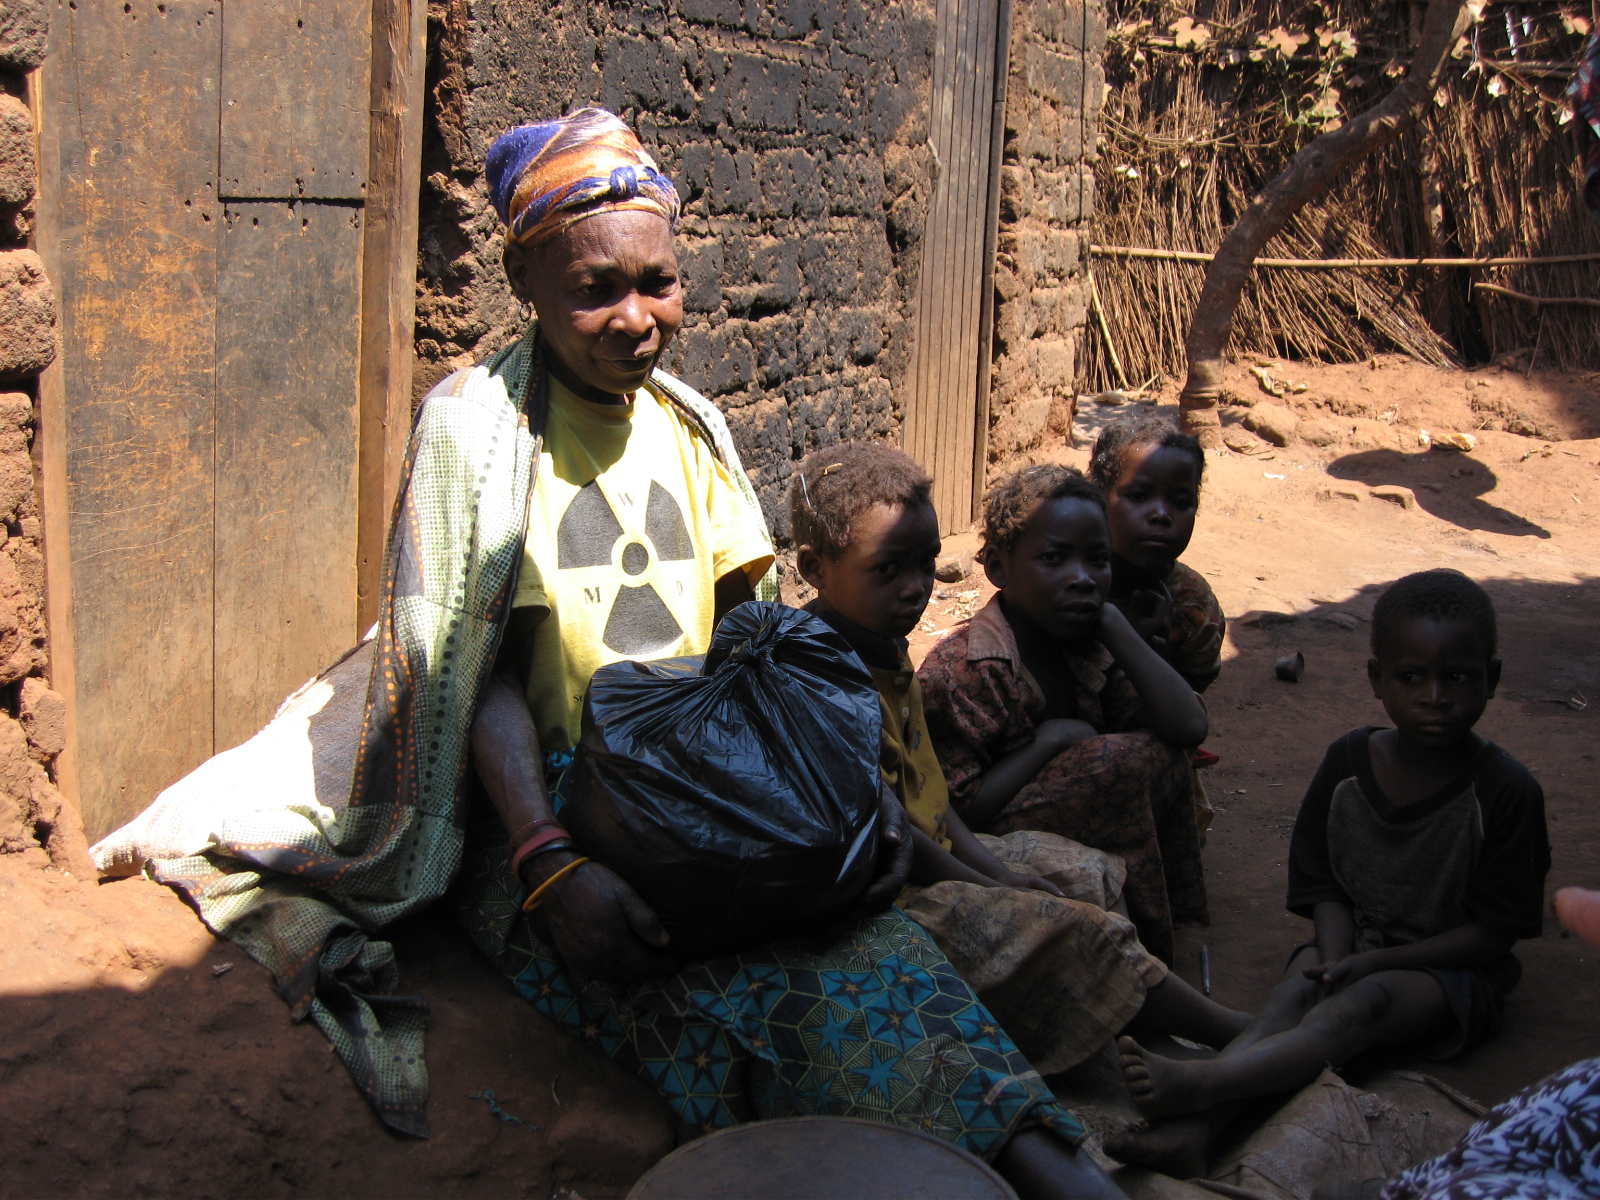 Older African woman sitting on the ground surrounded by four young children.